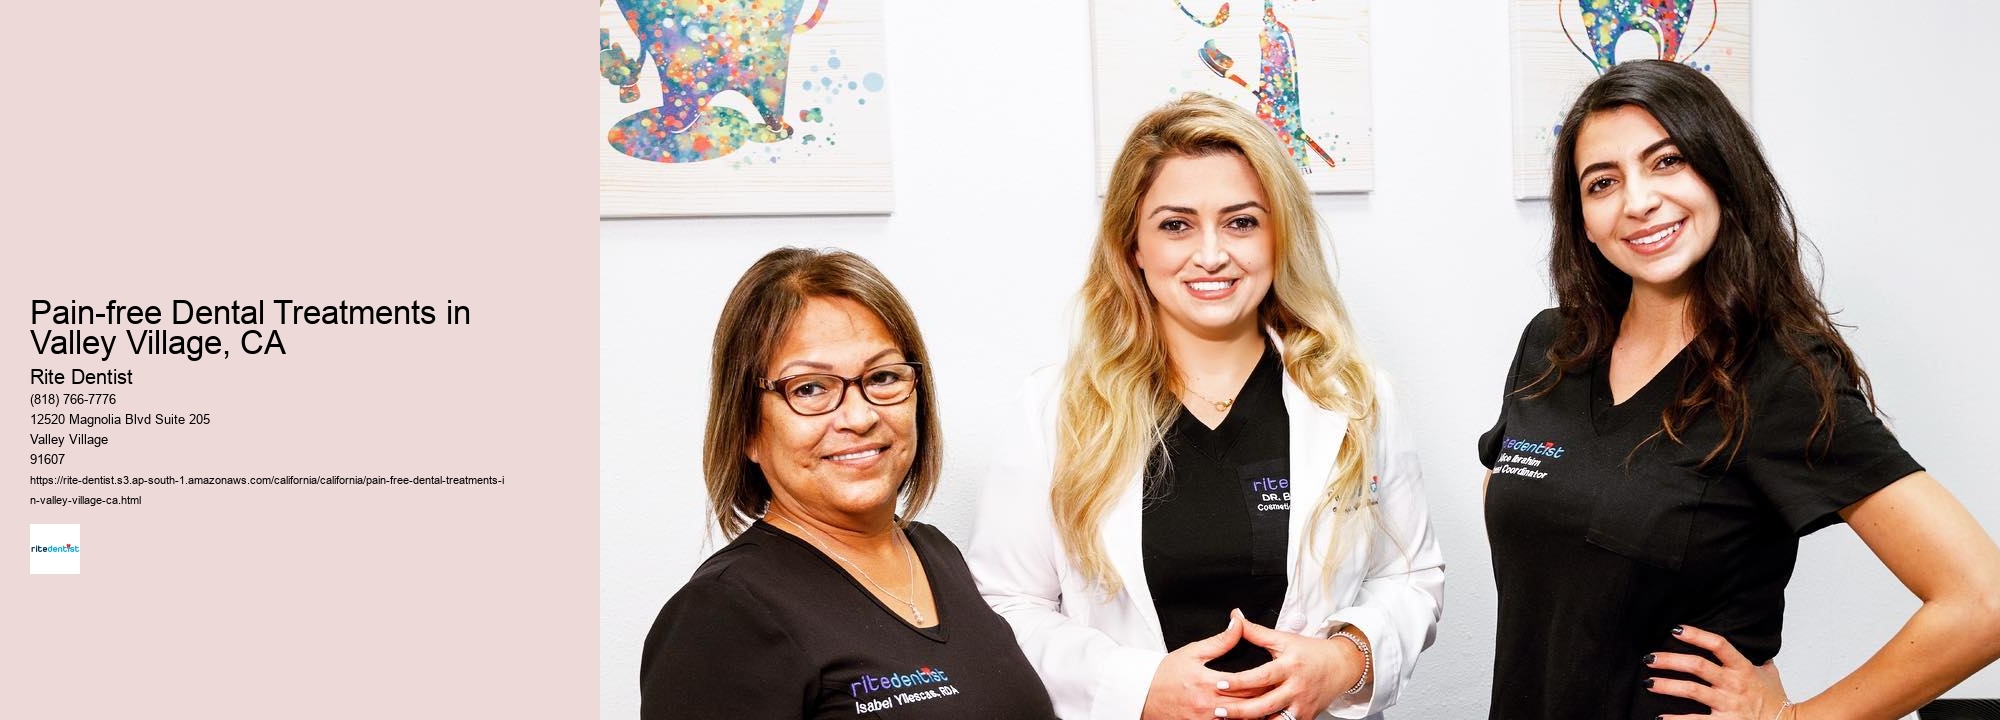 Pain-free Dental Treatments in Valley Village, CA